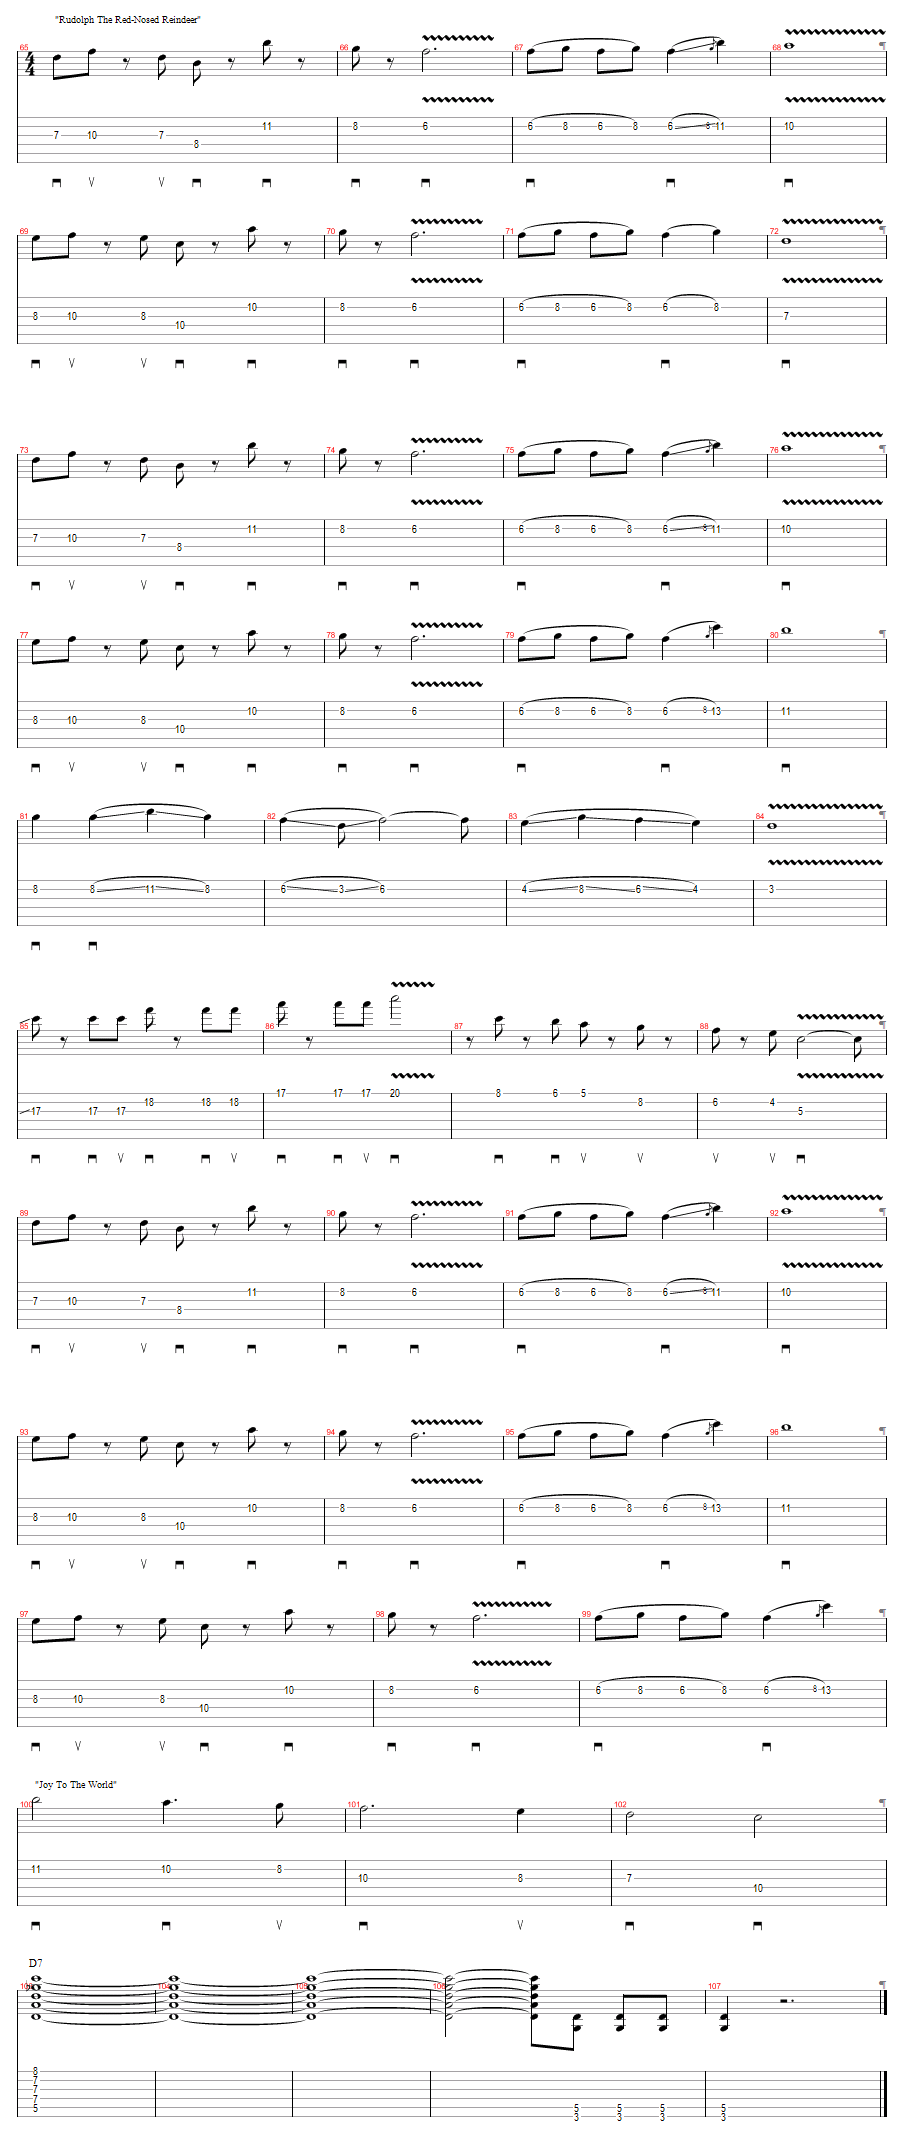 Tablature for A Metal Christmas - Part 4